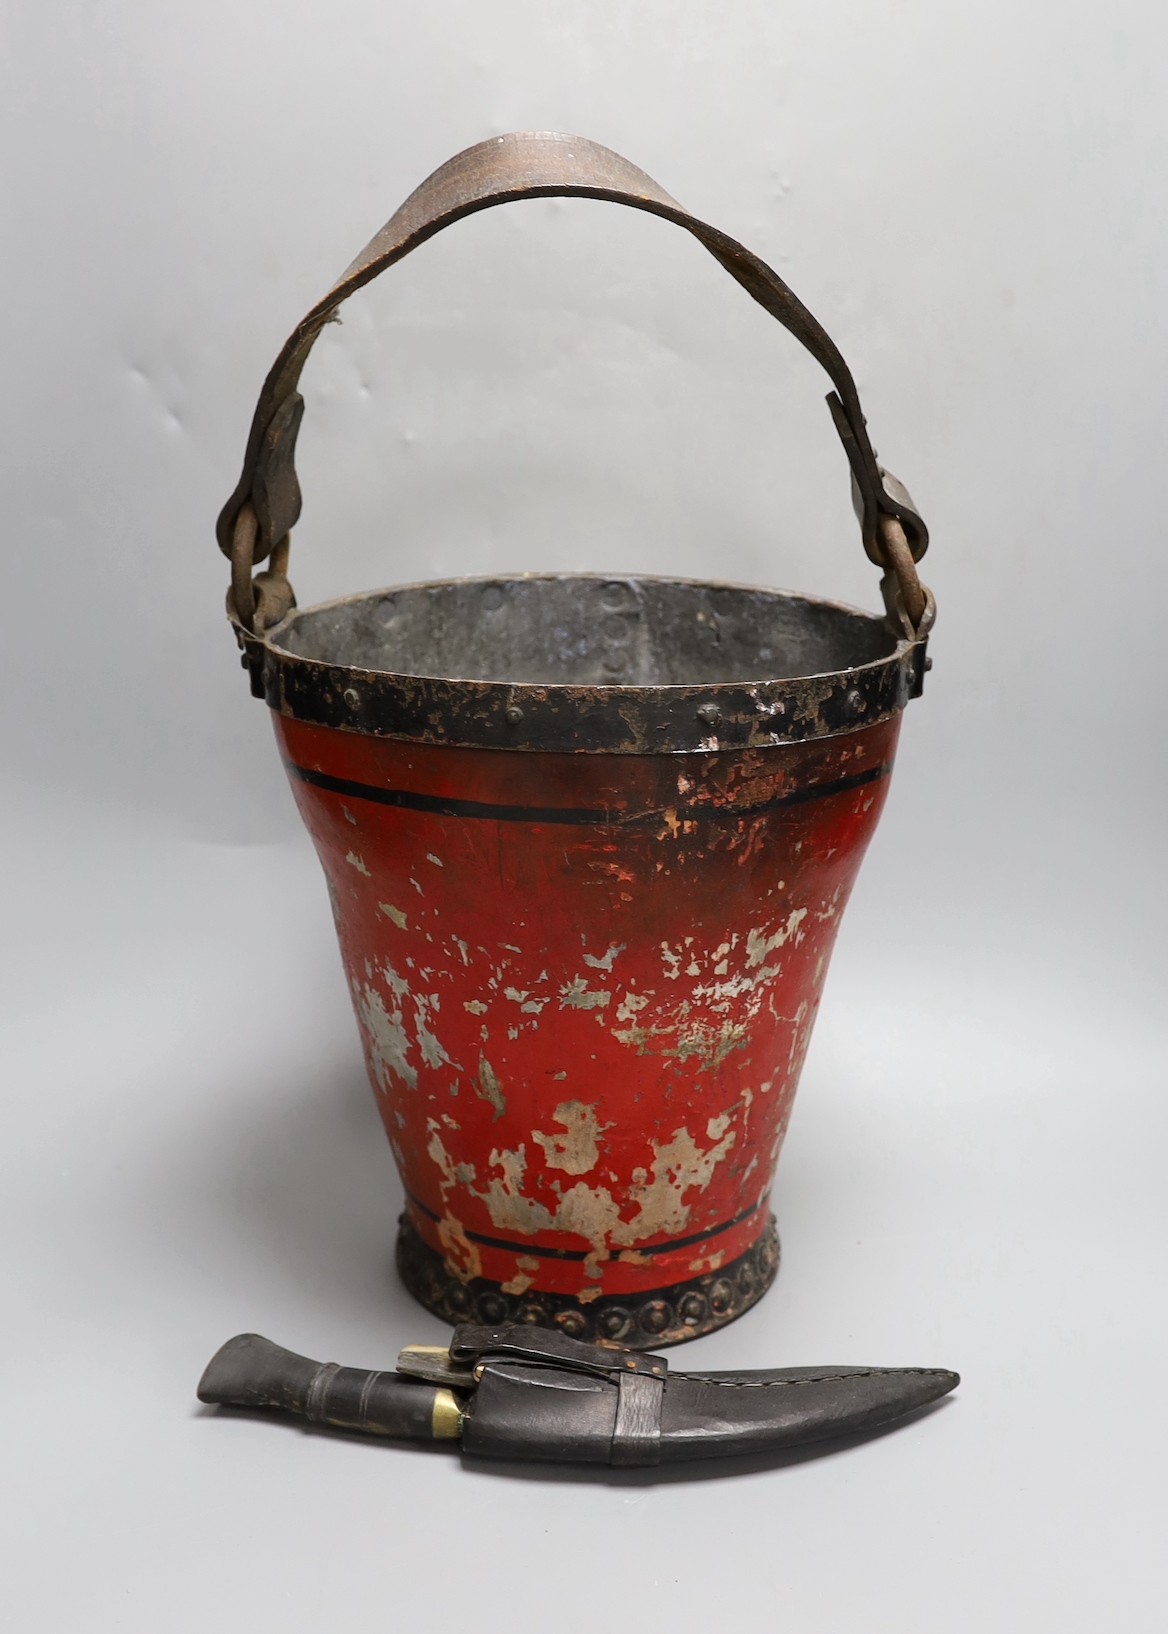 A 19th century iron bound painted leather fire bucket together with a small kukri knife